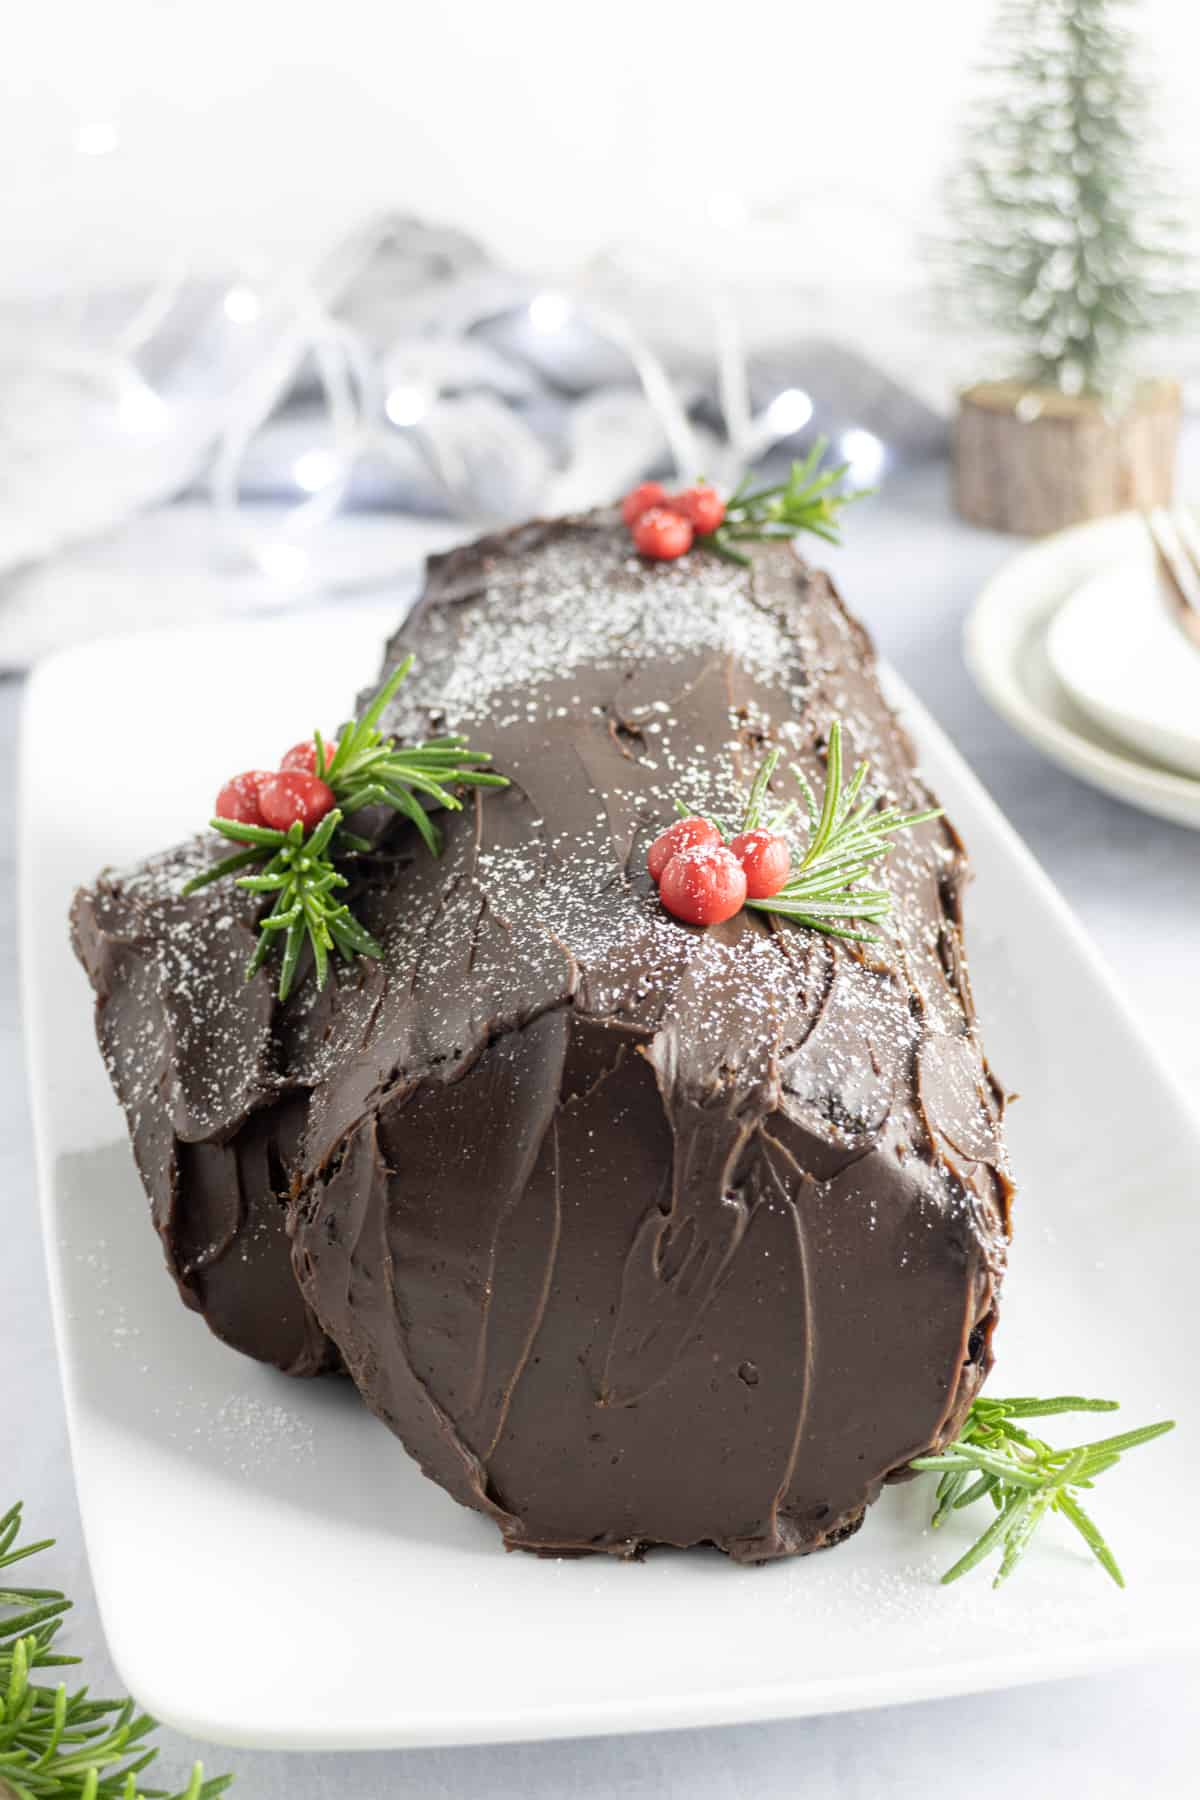 Chocolate roulade decorated with chocolate icing and icing sugar and sugar berries and holly sprigs